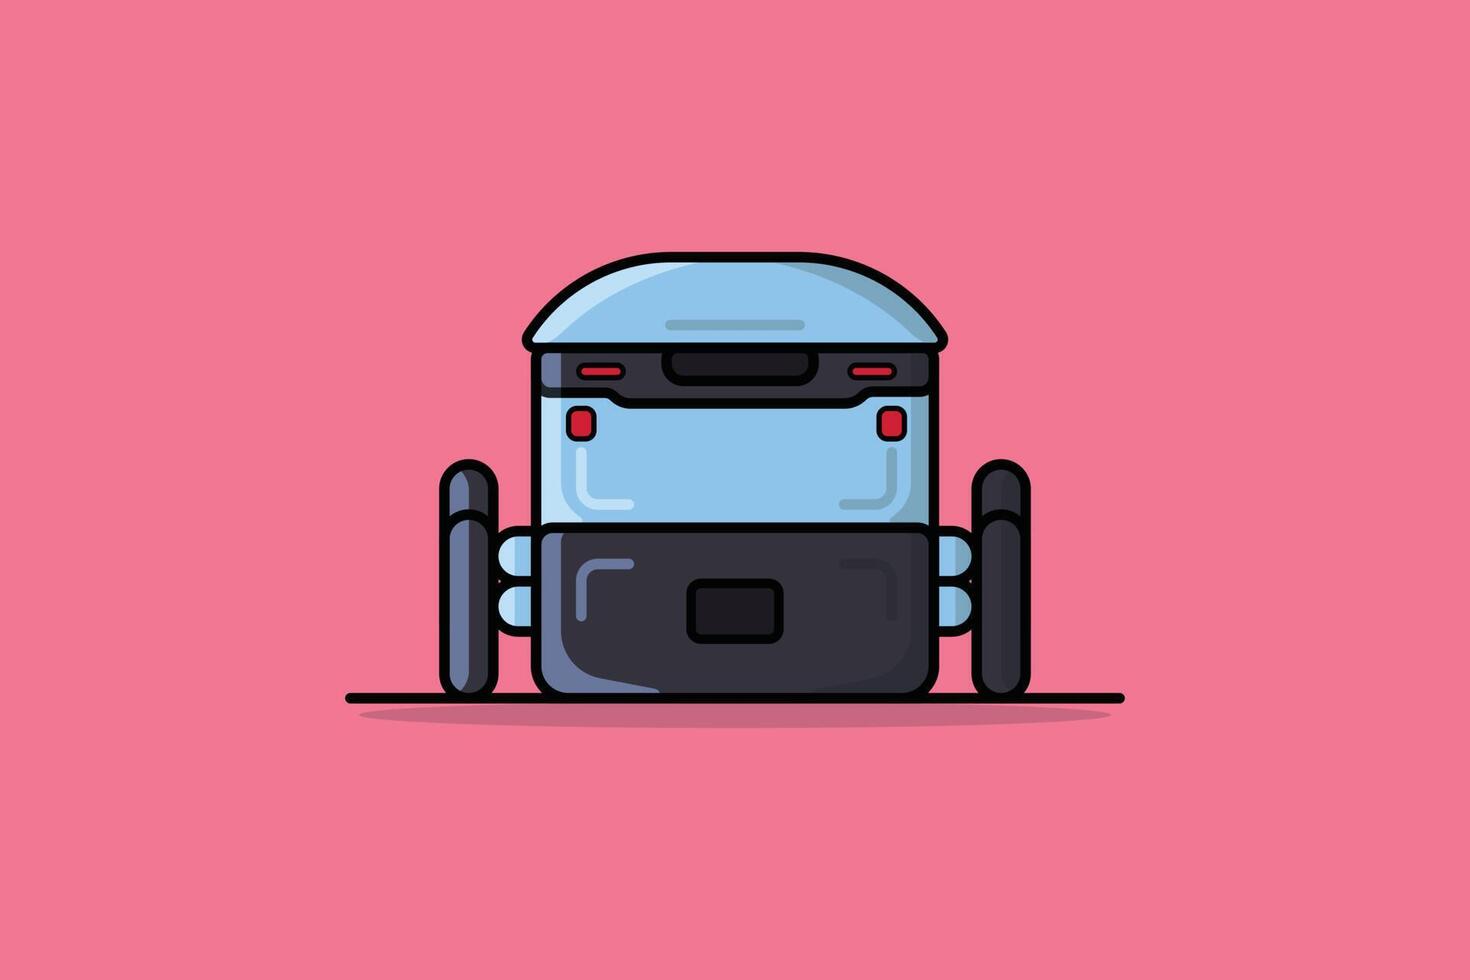 Modern Robot Food Delivery vector illustration. Science and Technology object icon concept. Food safe and good delivered by robot machine vector design. Robot delivery and new technology concept.